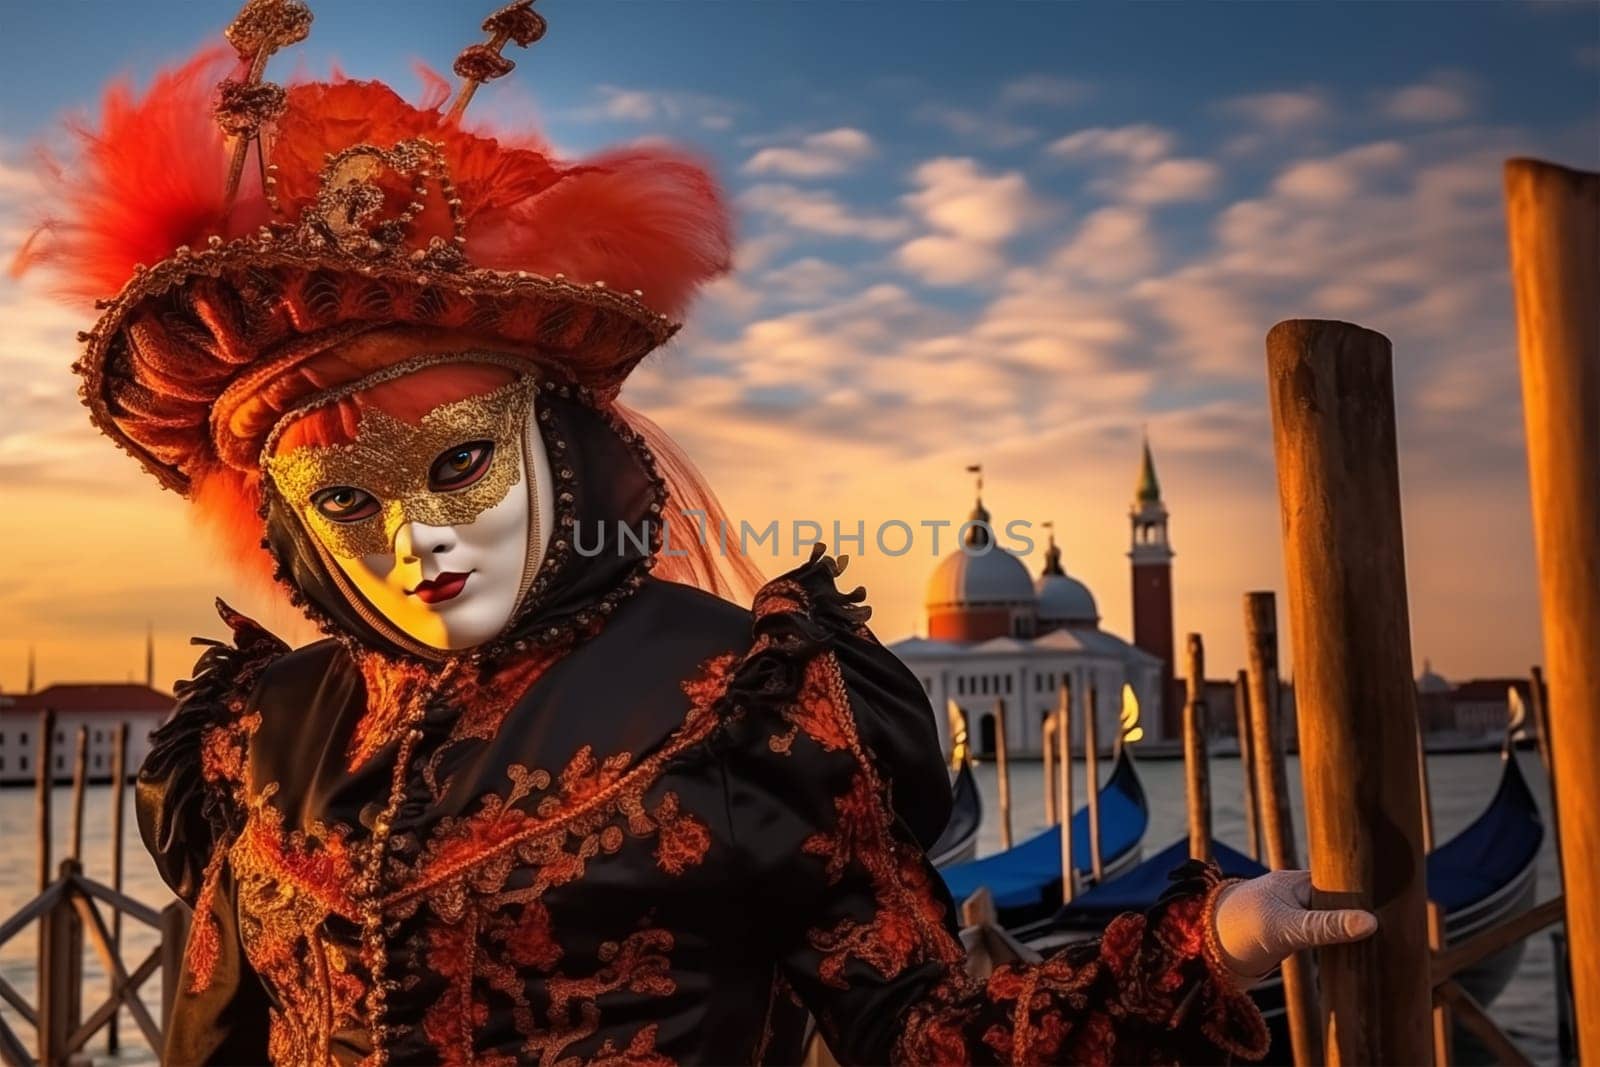 Person in Venetian Carnival Mask at Sunset by dimol